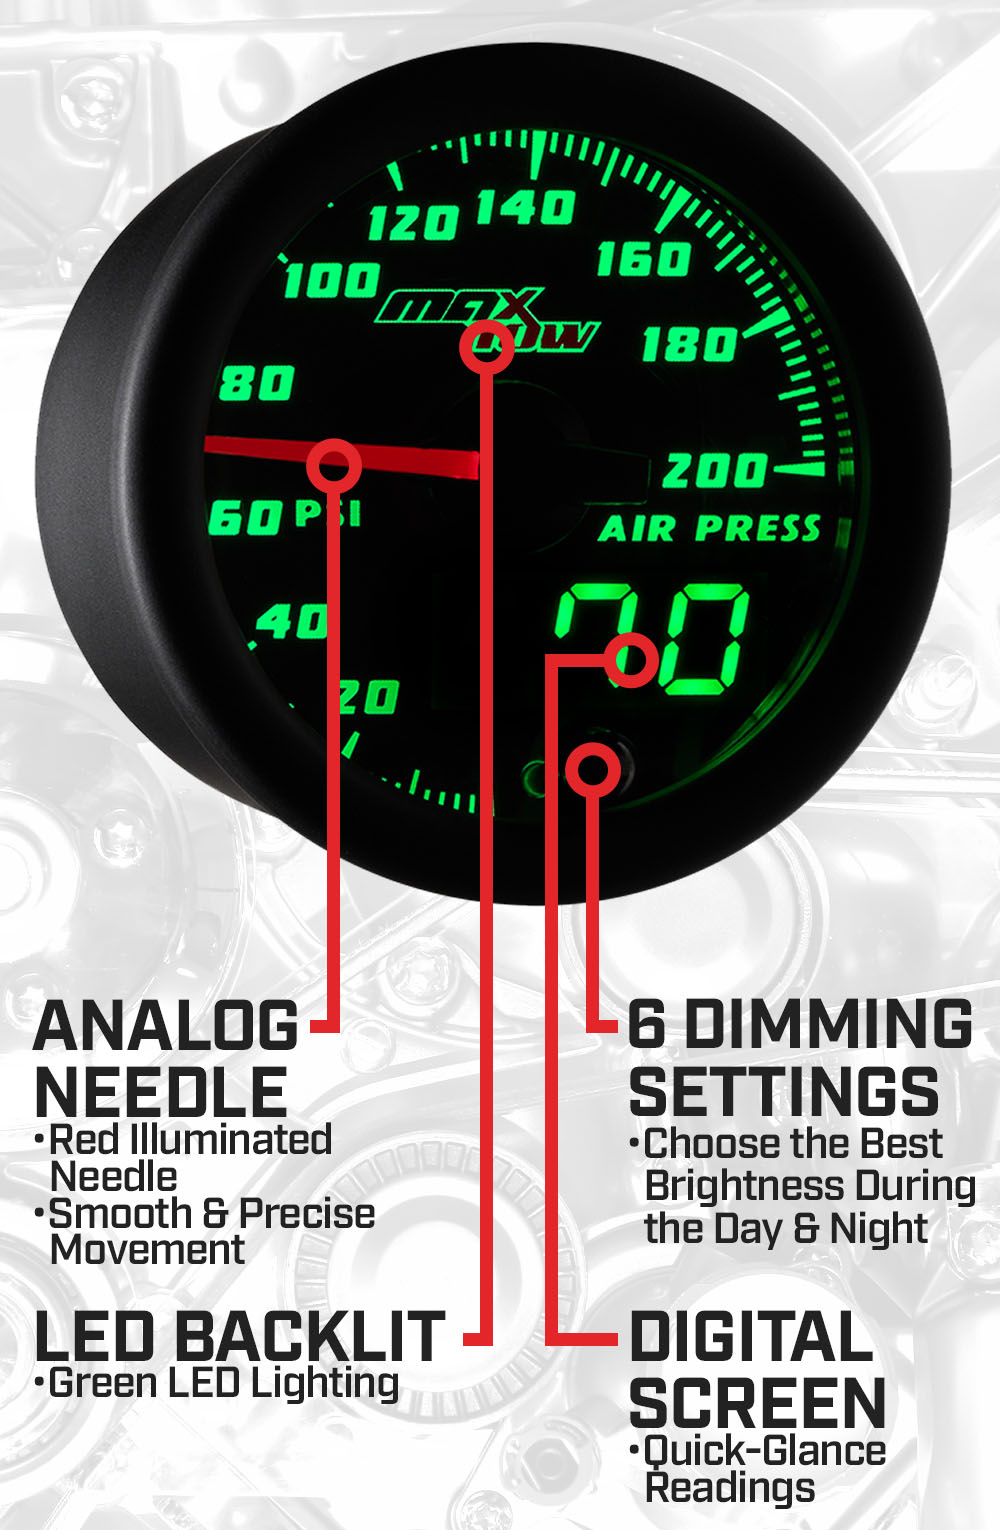 Black & Green Double Vision Air Pressure Gauge Features